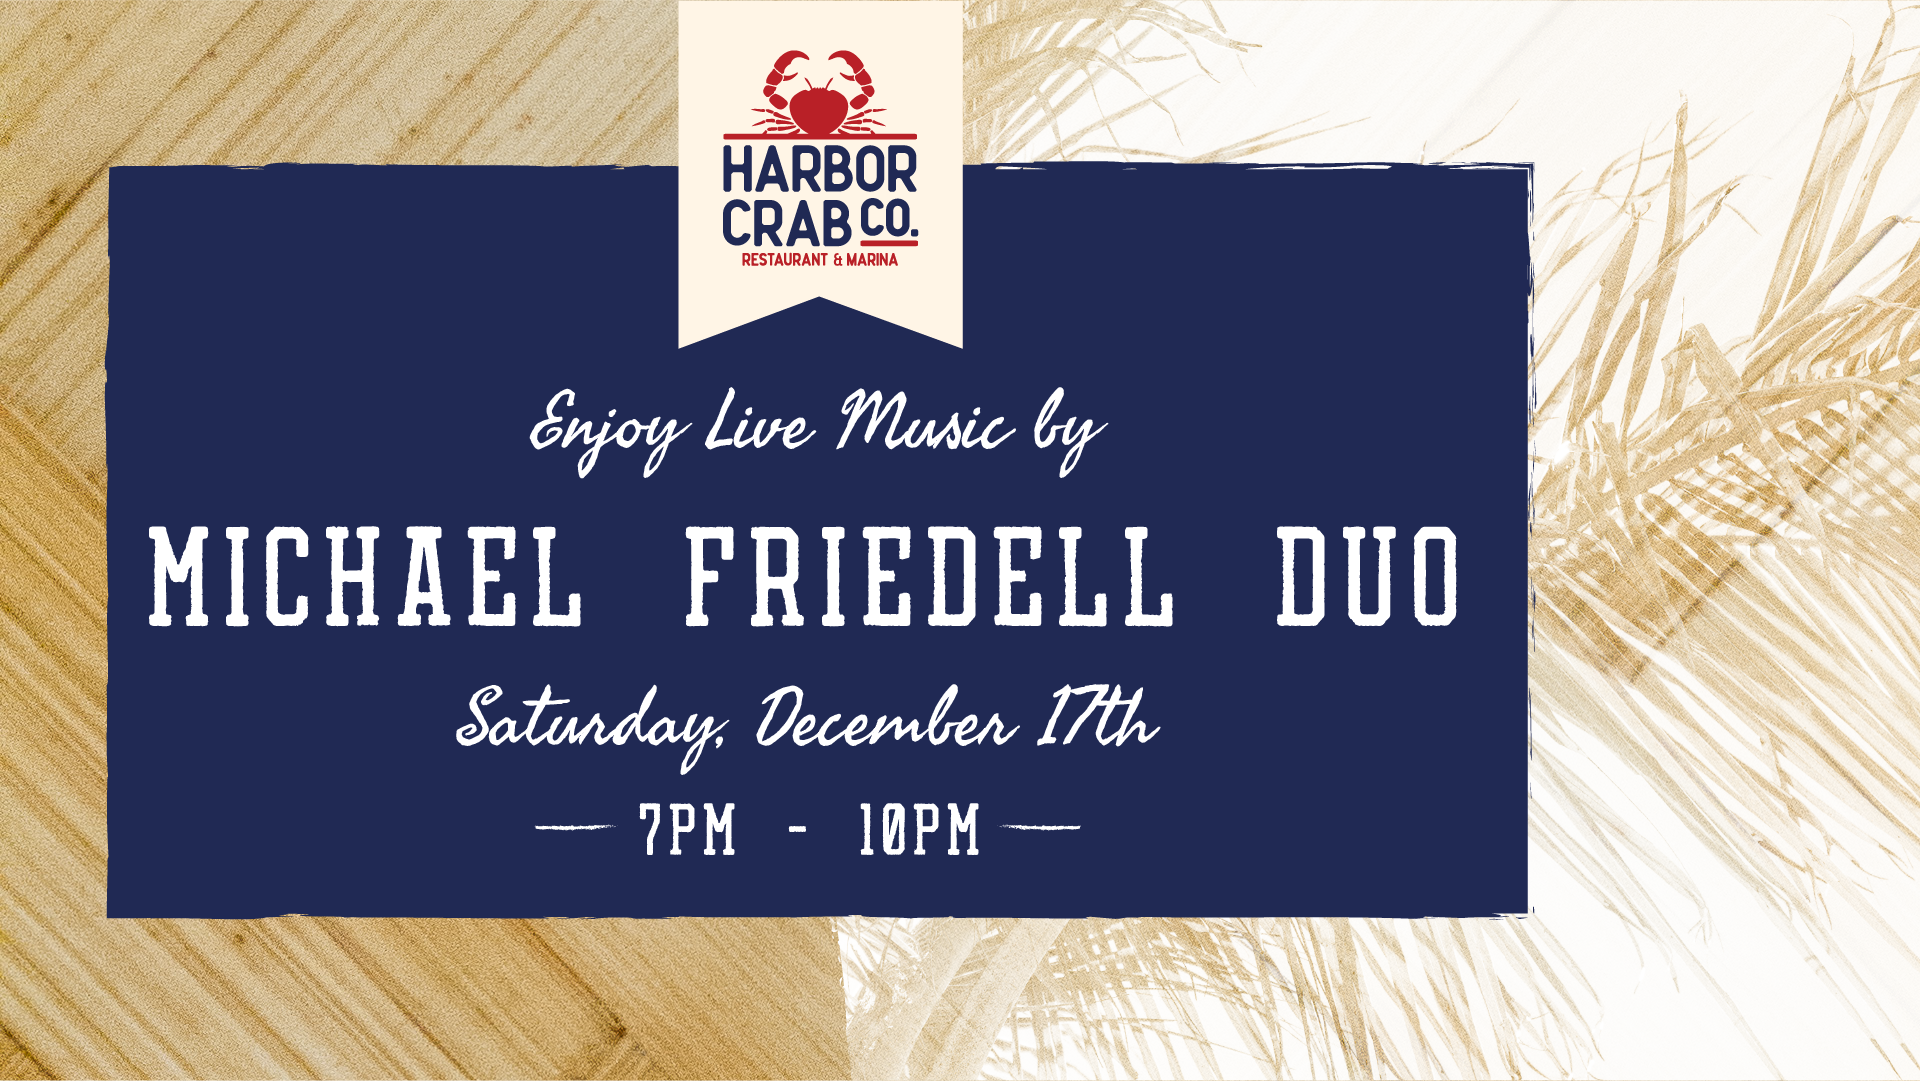 Flyer for Michael Friedell Duo on Saturday, Dec. 17th